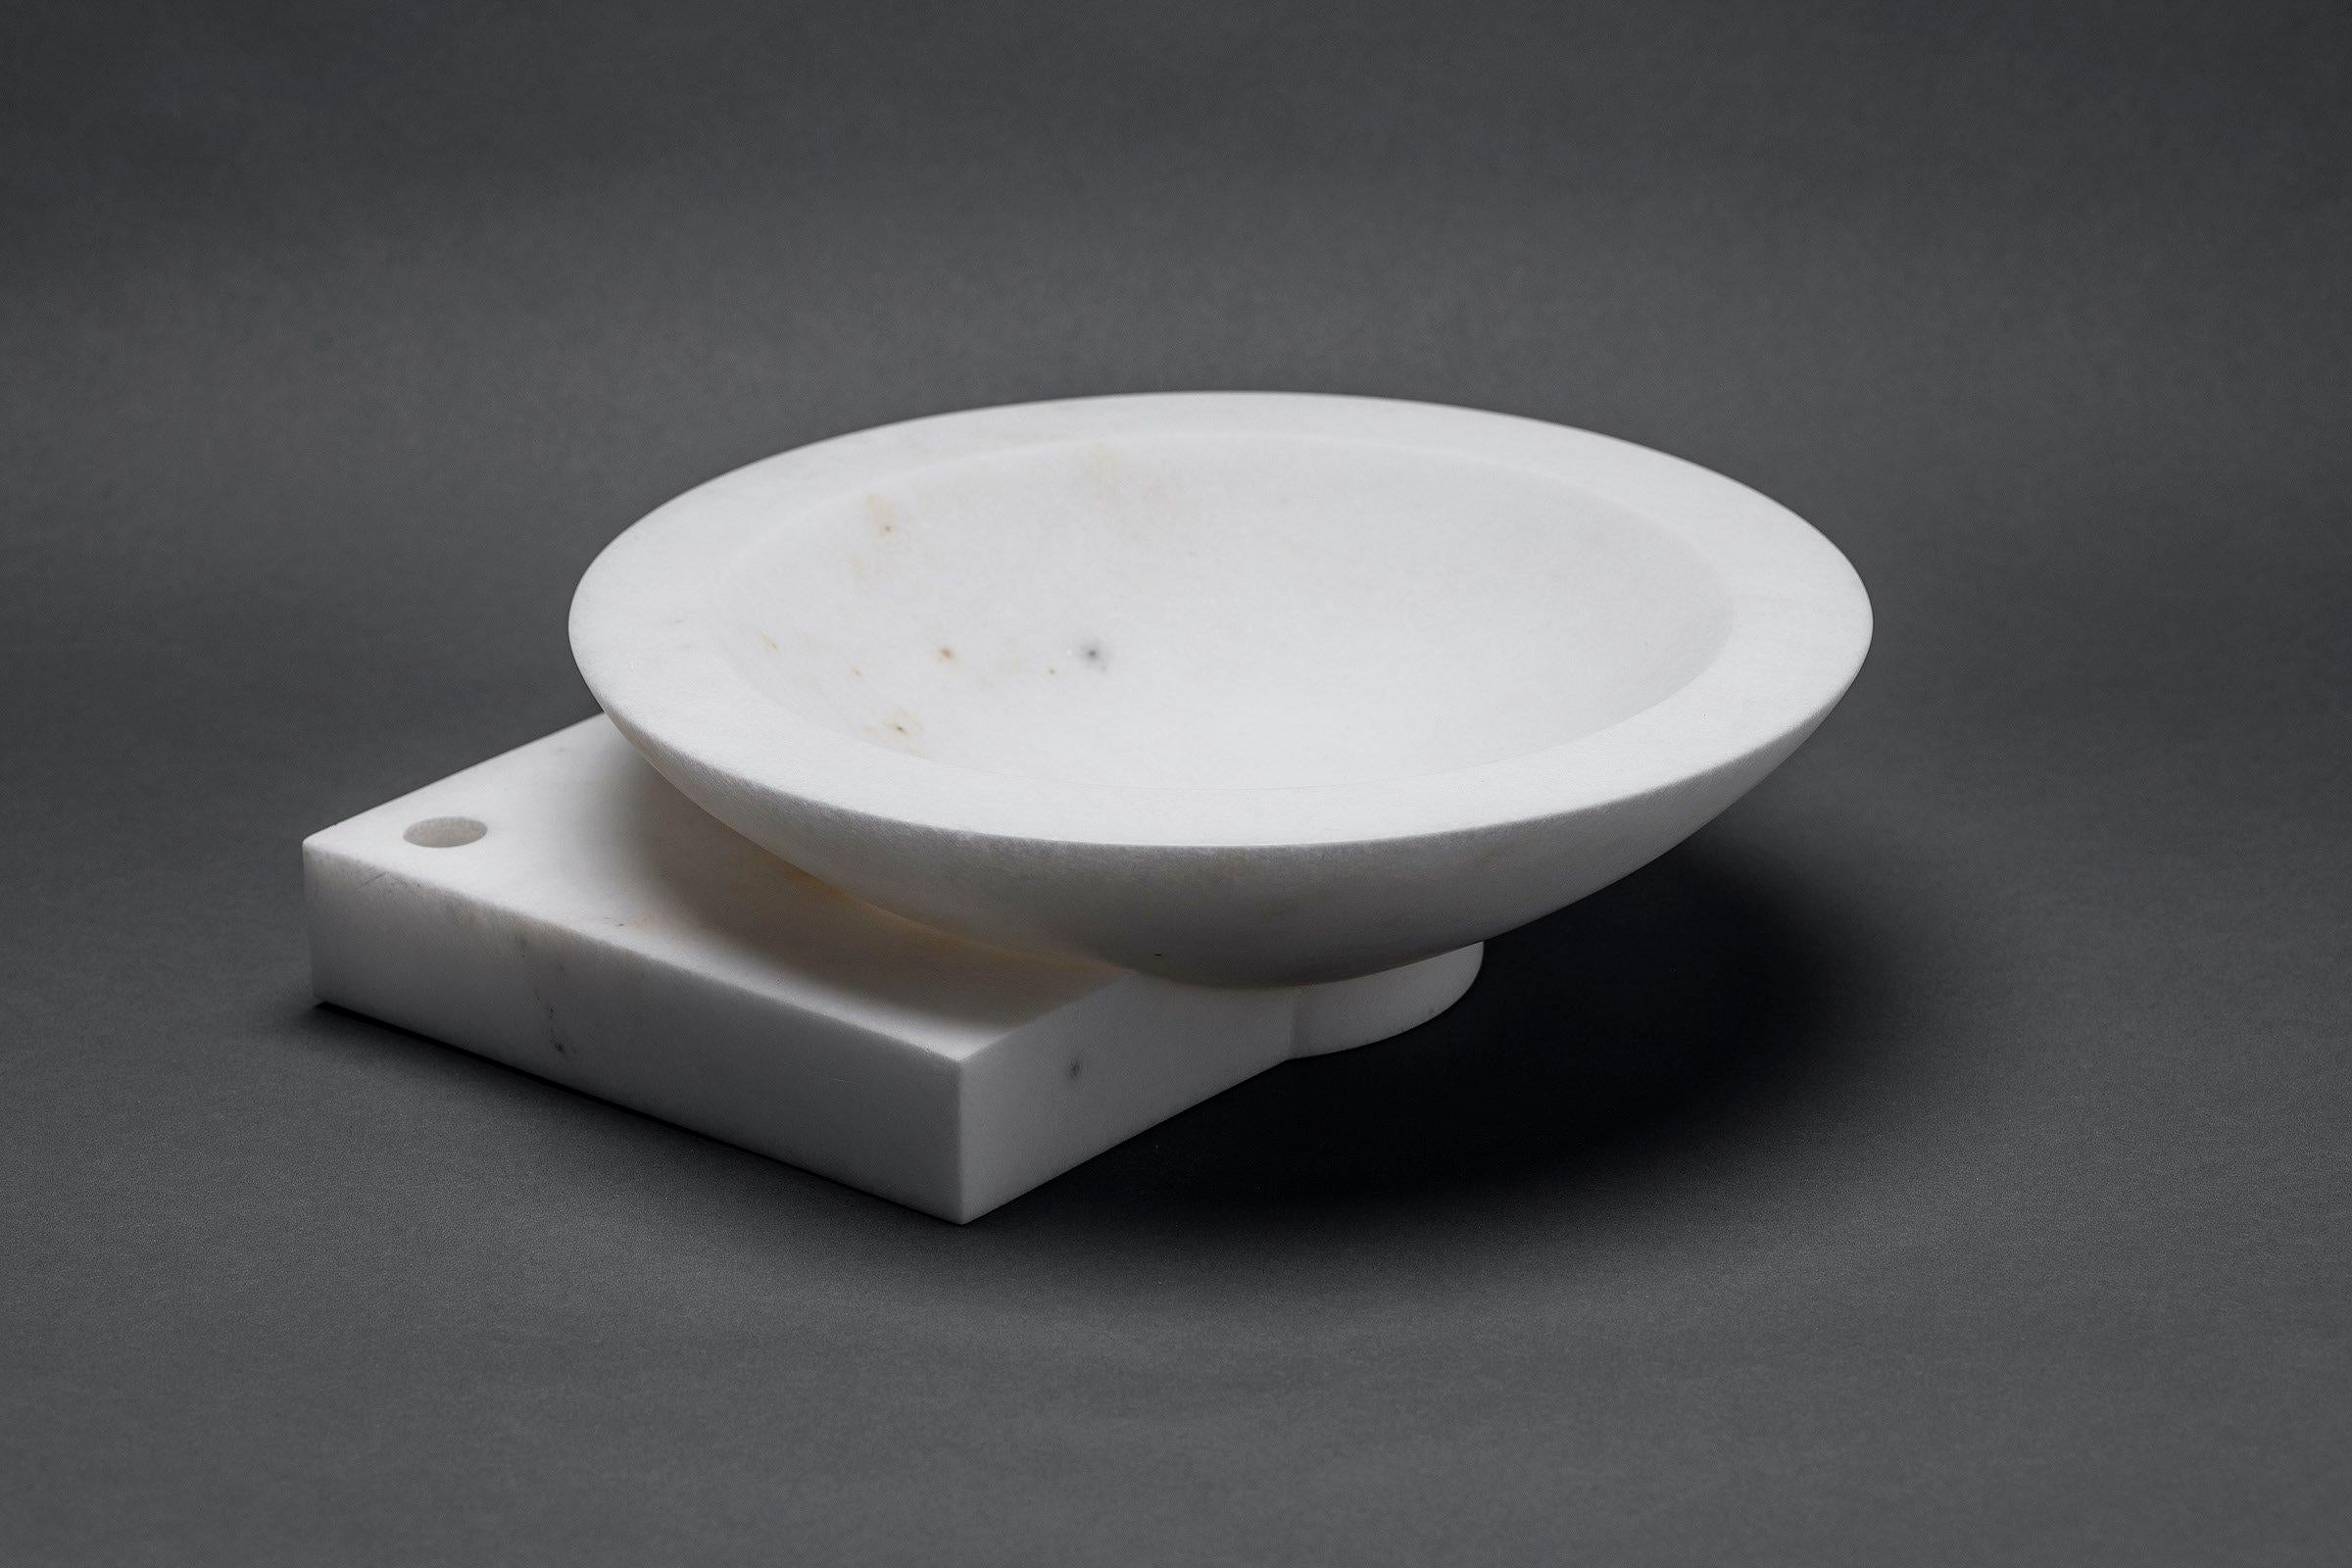 Tazón Bajo Galeana bowl by Jorge Diego Etienne
Limited Edition of 10 + 1 AP
Dimensions: D 30 x W 30 x H 9 cm
Material: alabaster

Galeana is a collection of 6 objects designed by Jorge Diego Etienne and sculpted in alabaster by the Master